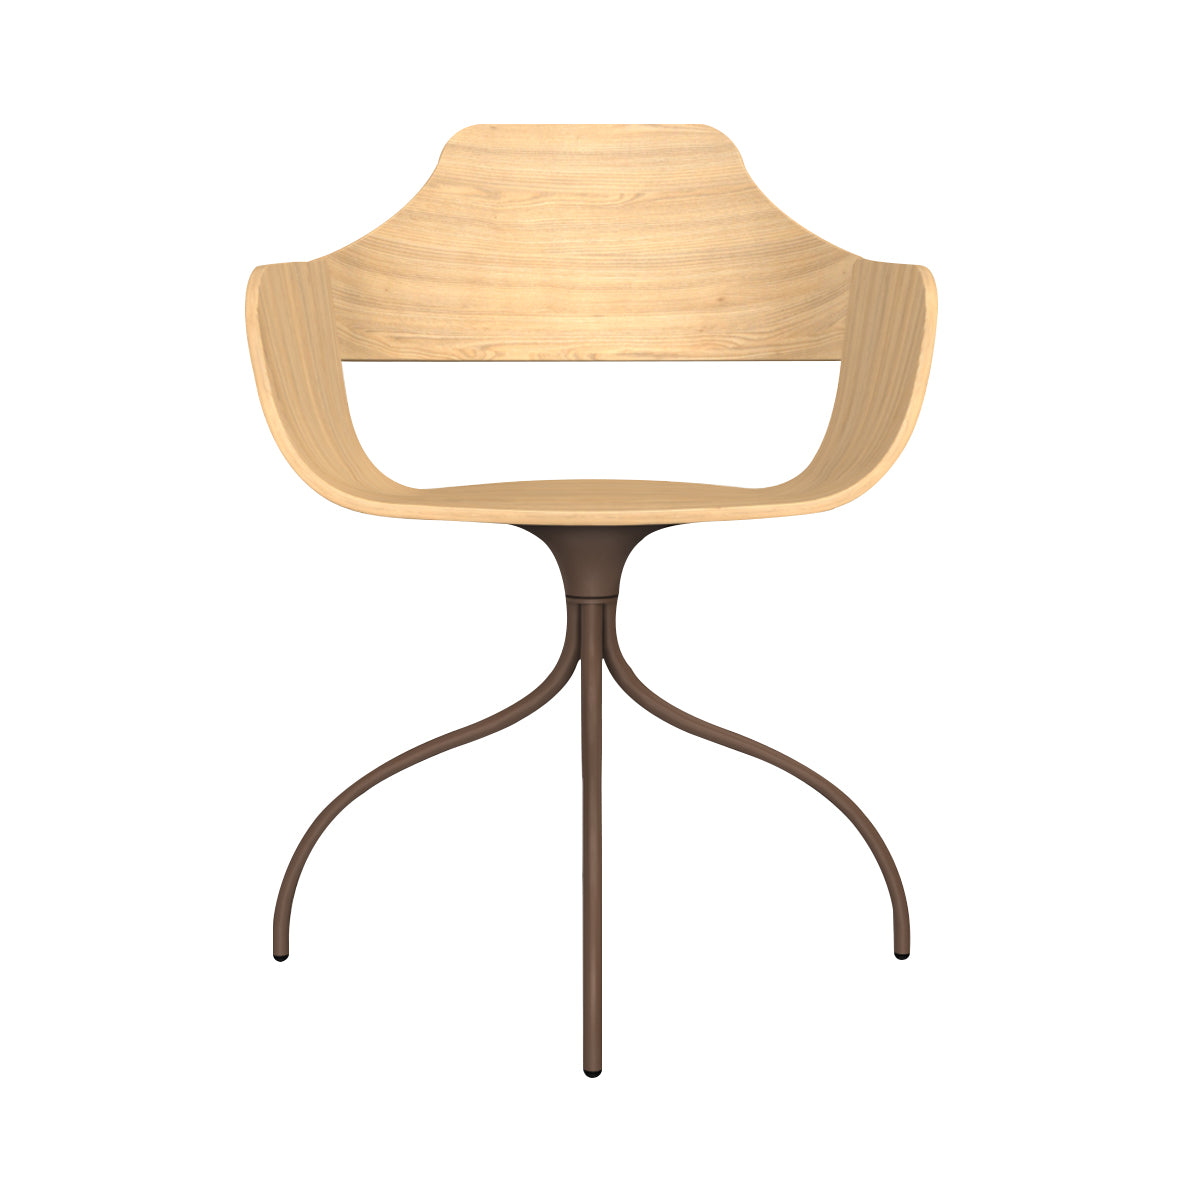 Showtime Chair with Swivel Base: Ash Stained Oak + Pale Brown